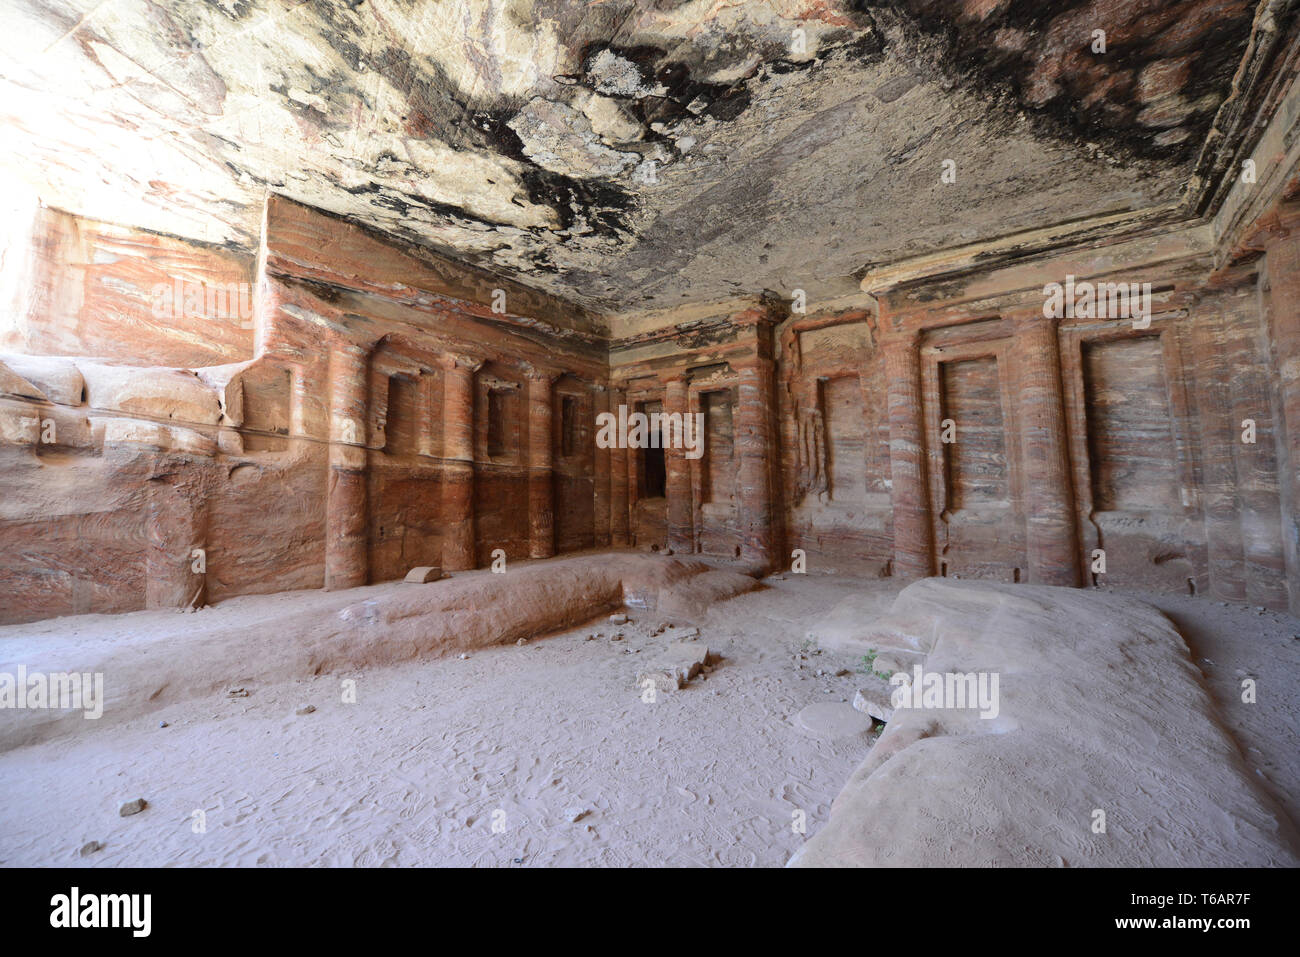 Inside an ancient Nabataean chamber carved in the rock. Stock Photo